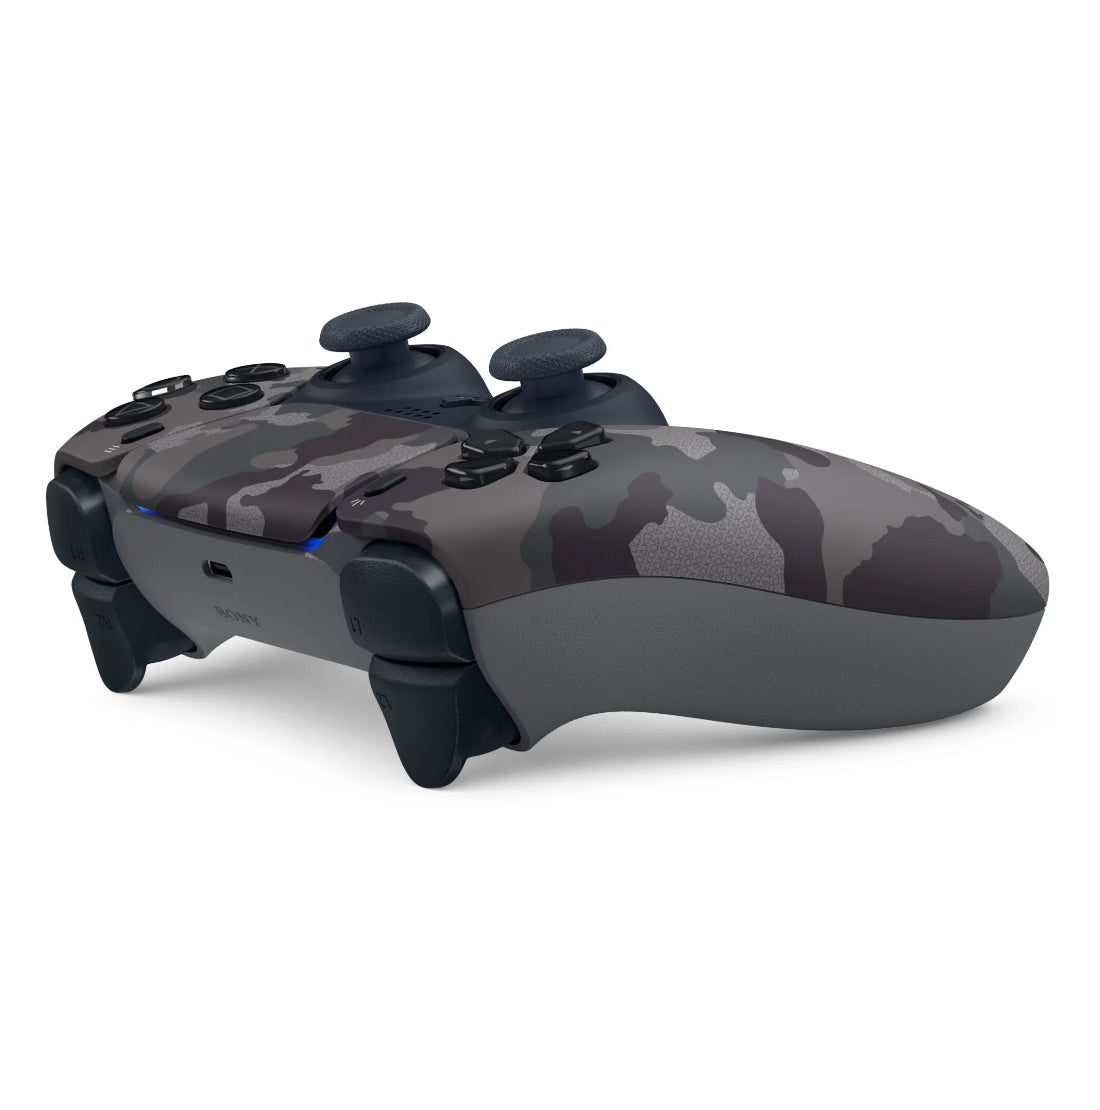 Sony Playstation 5 Disc Edition Bundle with Extra Gray Camo Controller, Black PULSE 3D Wireless Headset and Gamer Starter Pack - Pro-Distributing